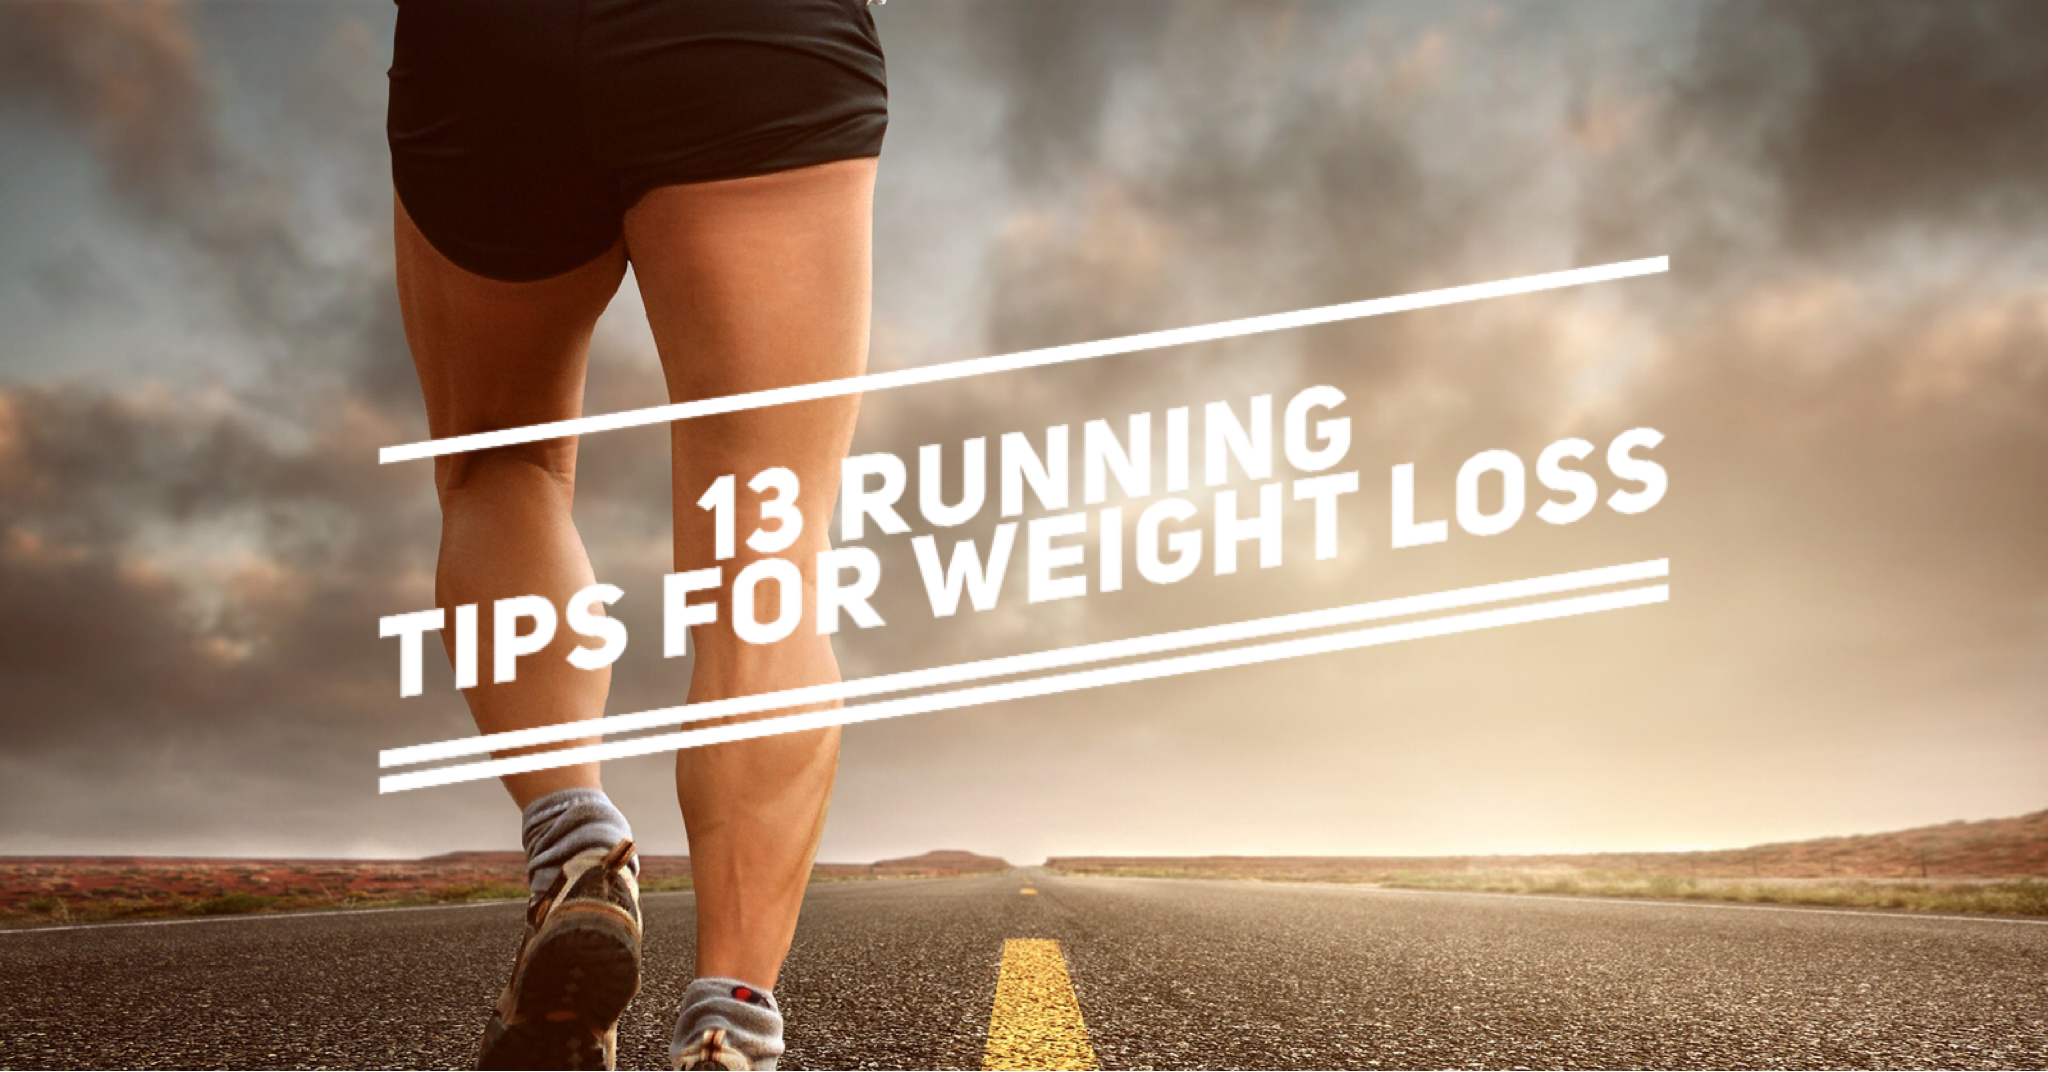 Running Tips for Weight Loss